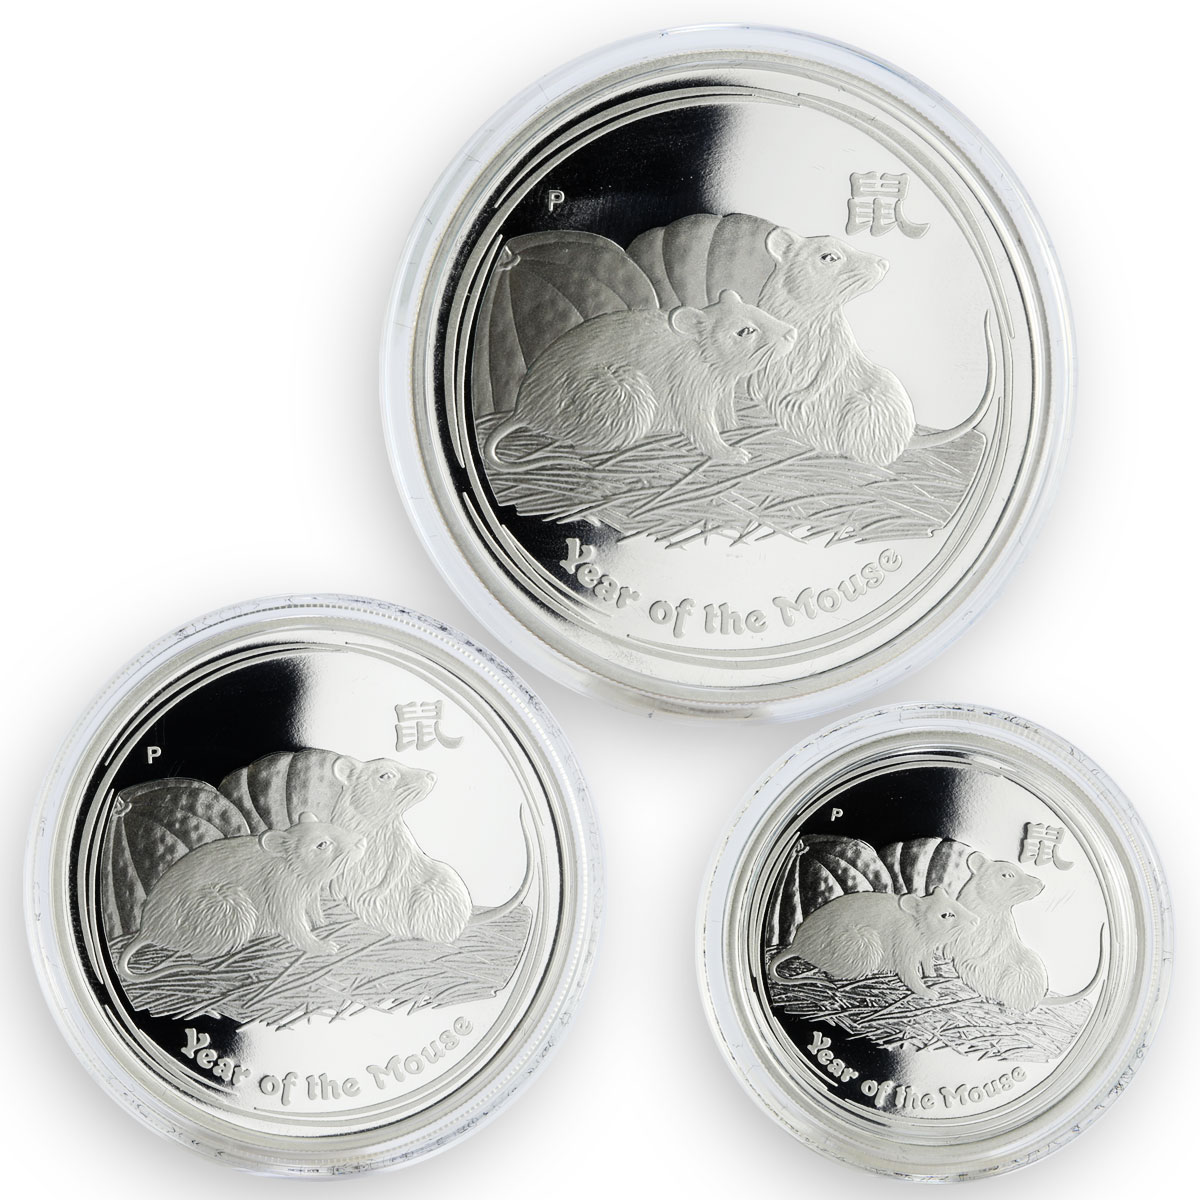 Australia 0.50, 1, 2 dollars Set Year of the Mouse Lunar Series II Proof 2008